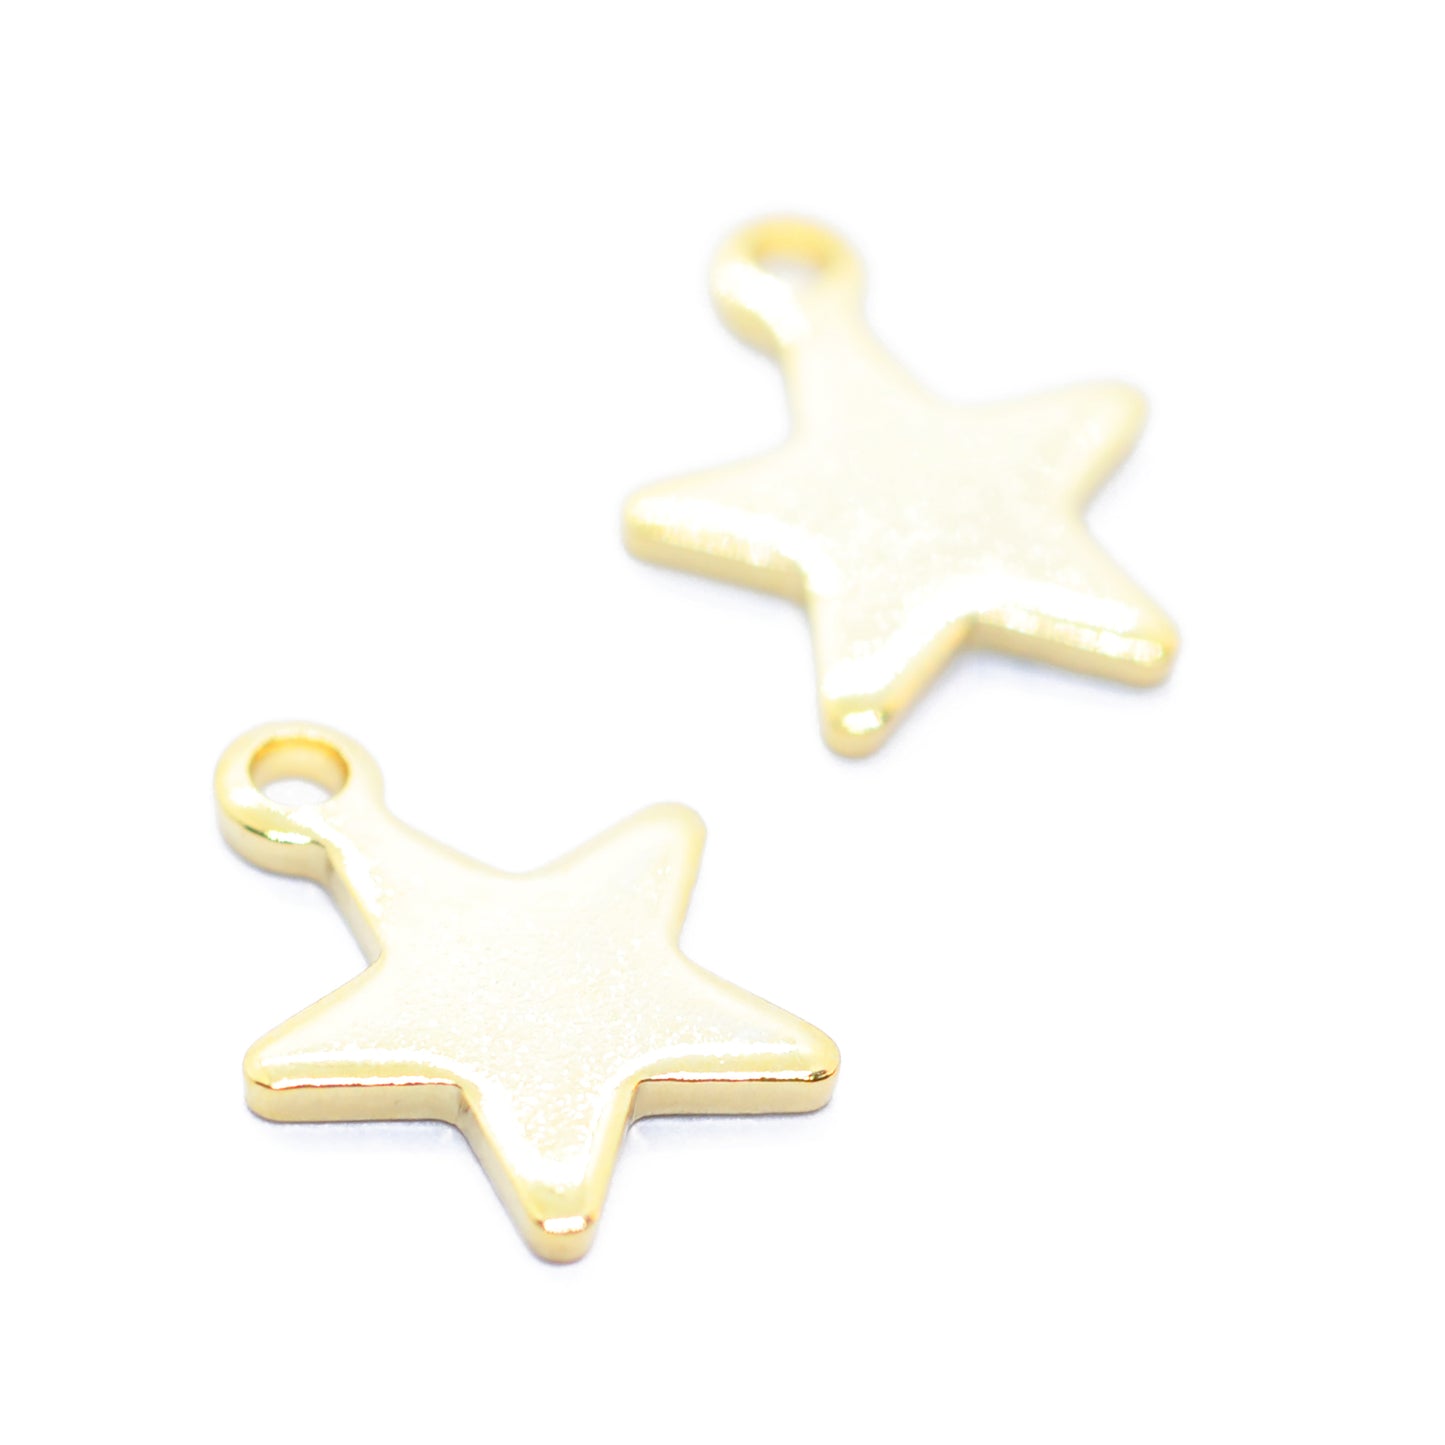 Stainless steel star pendant / gold plated / 12mm